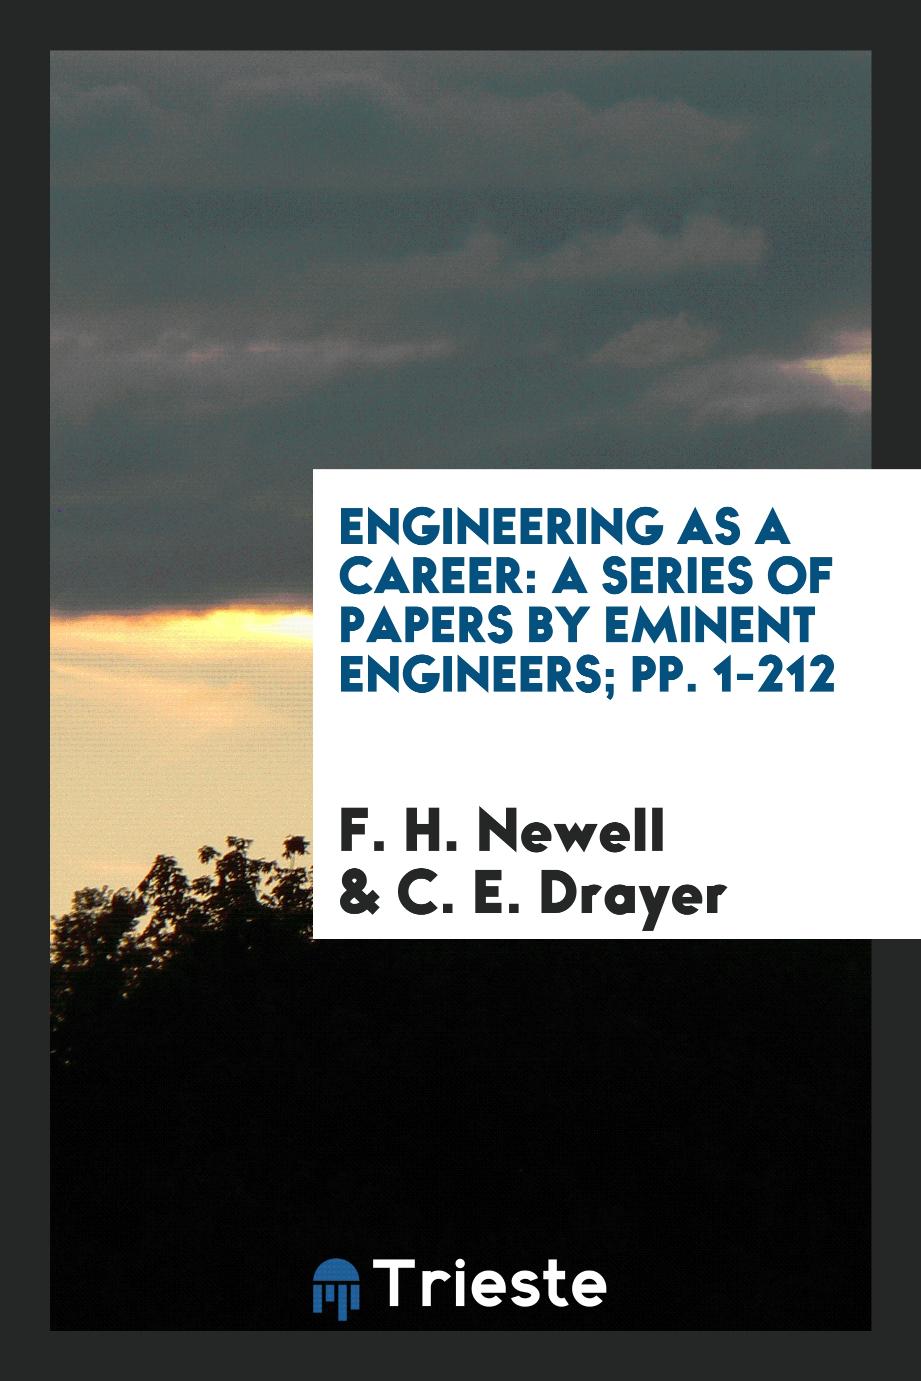 Engineering as a Career: A Series of Papers by Eminent Engineers; pp. 1-212